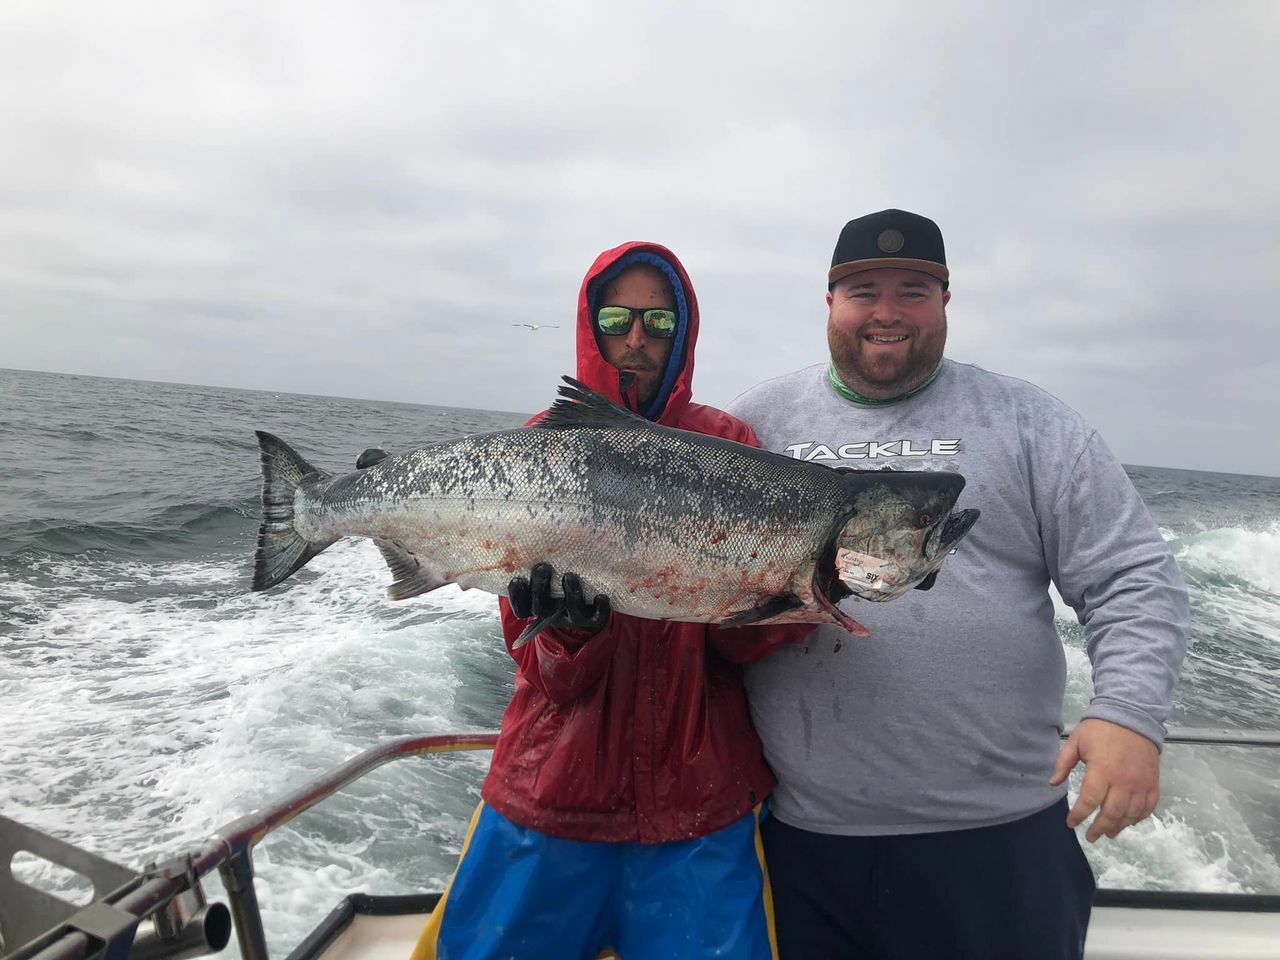 Another AMAZING outing on the Pacific 